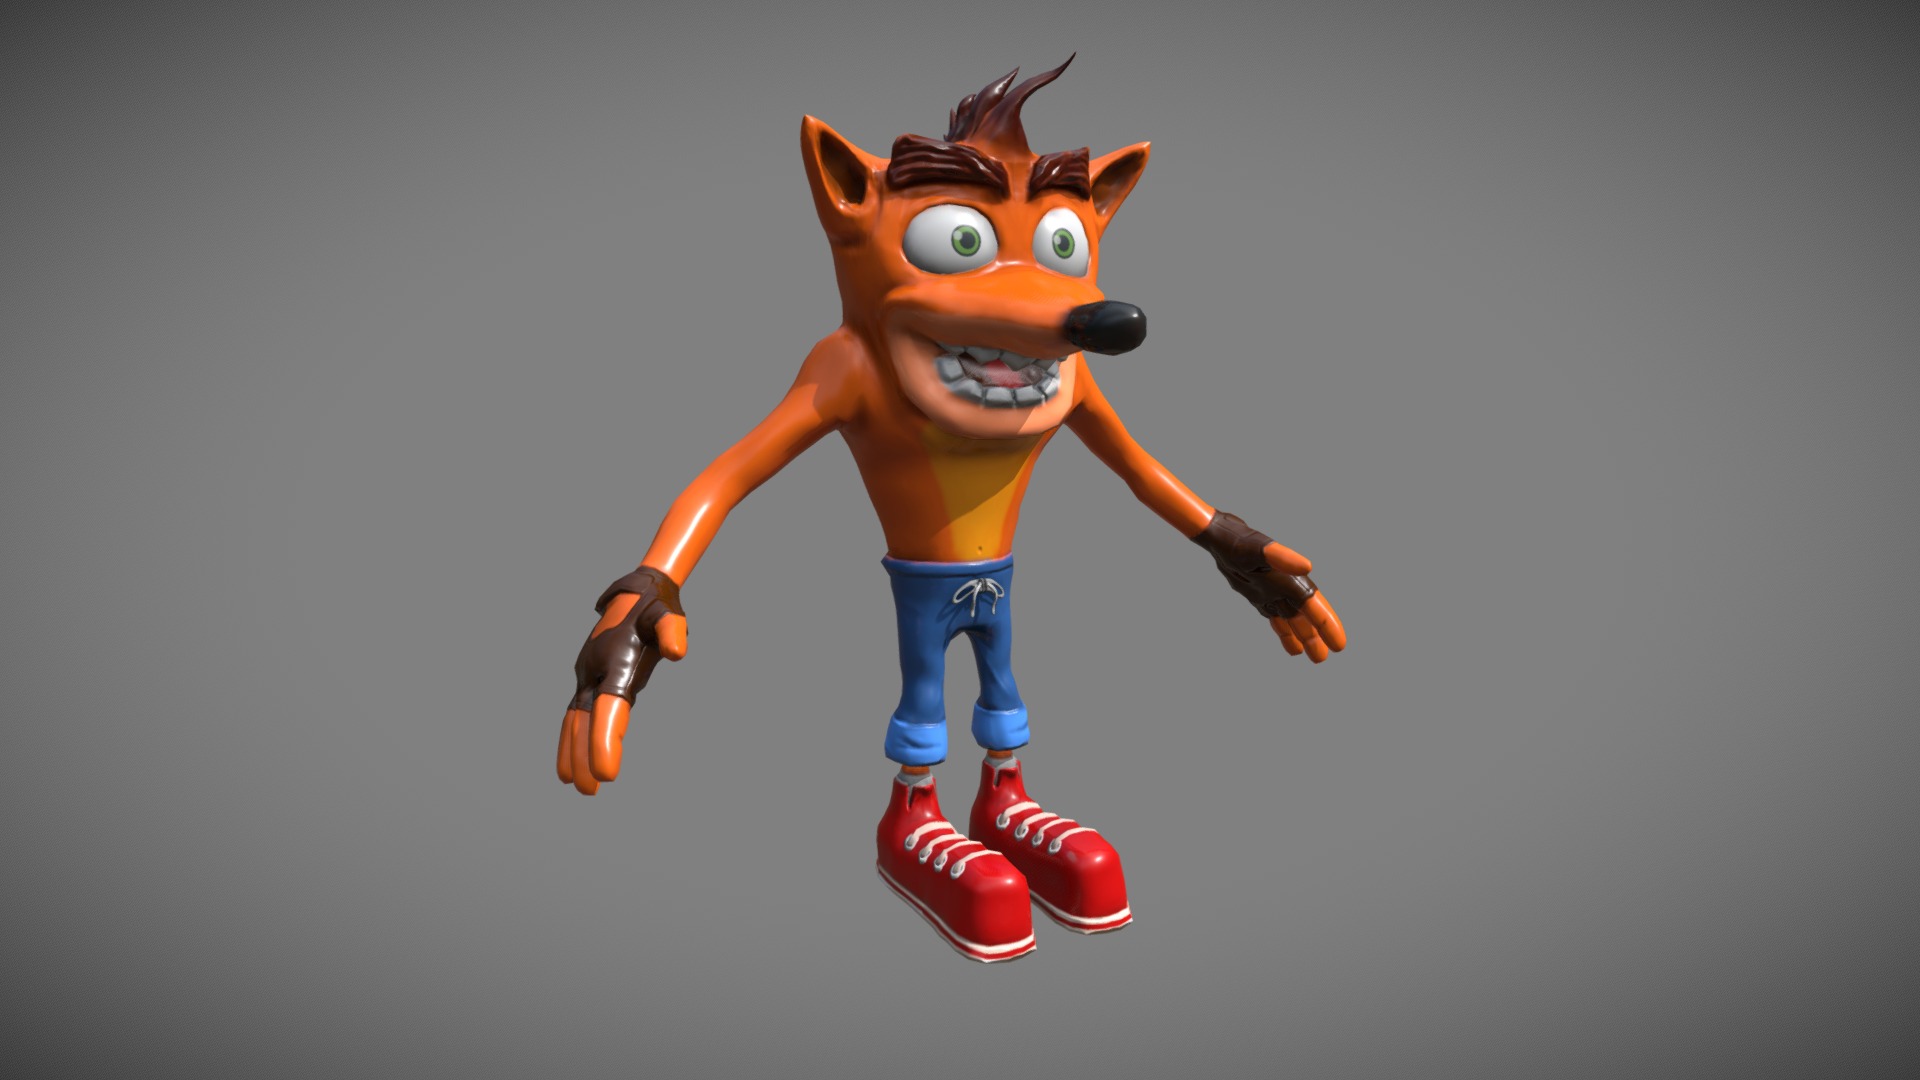 3D model 09 12 2019 Crash Bandicoot - This is a 3D model of the 09 12 2019 Crash Bandicoot. The 3D model is about a toy on a surface.